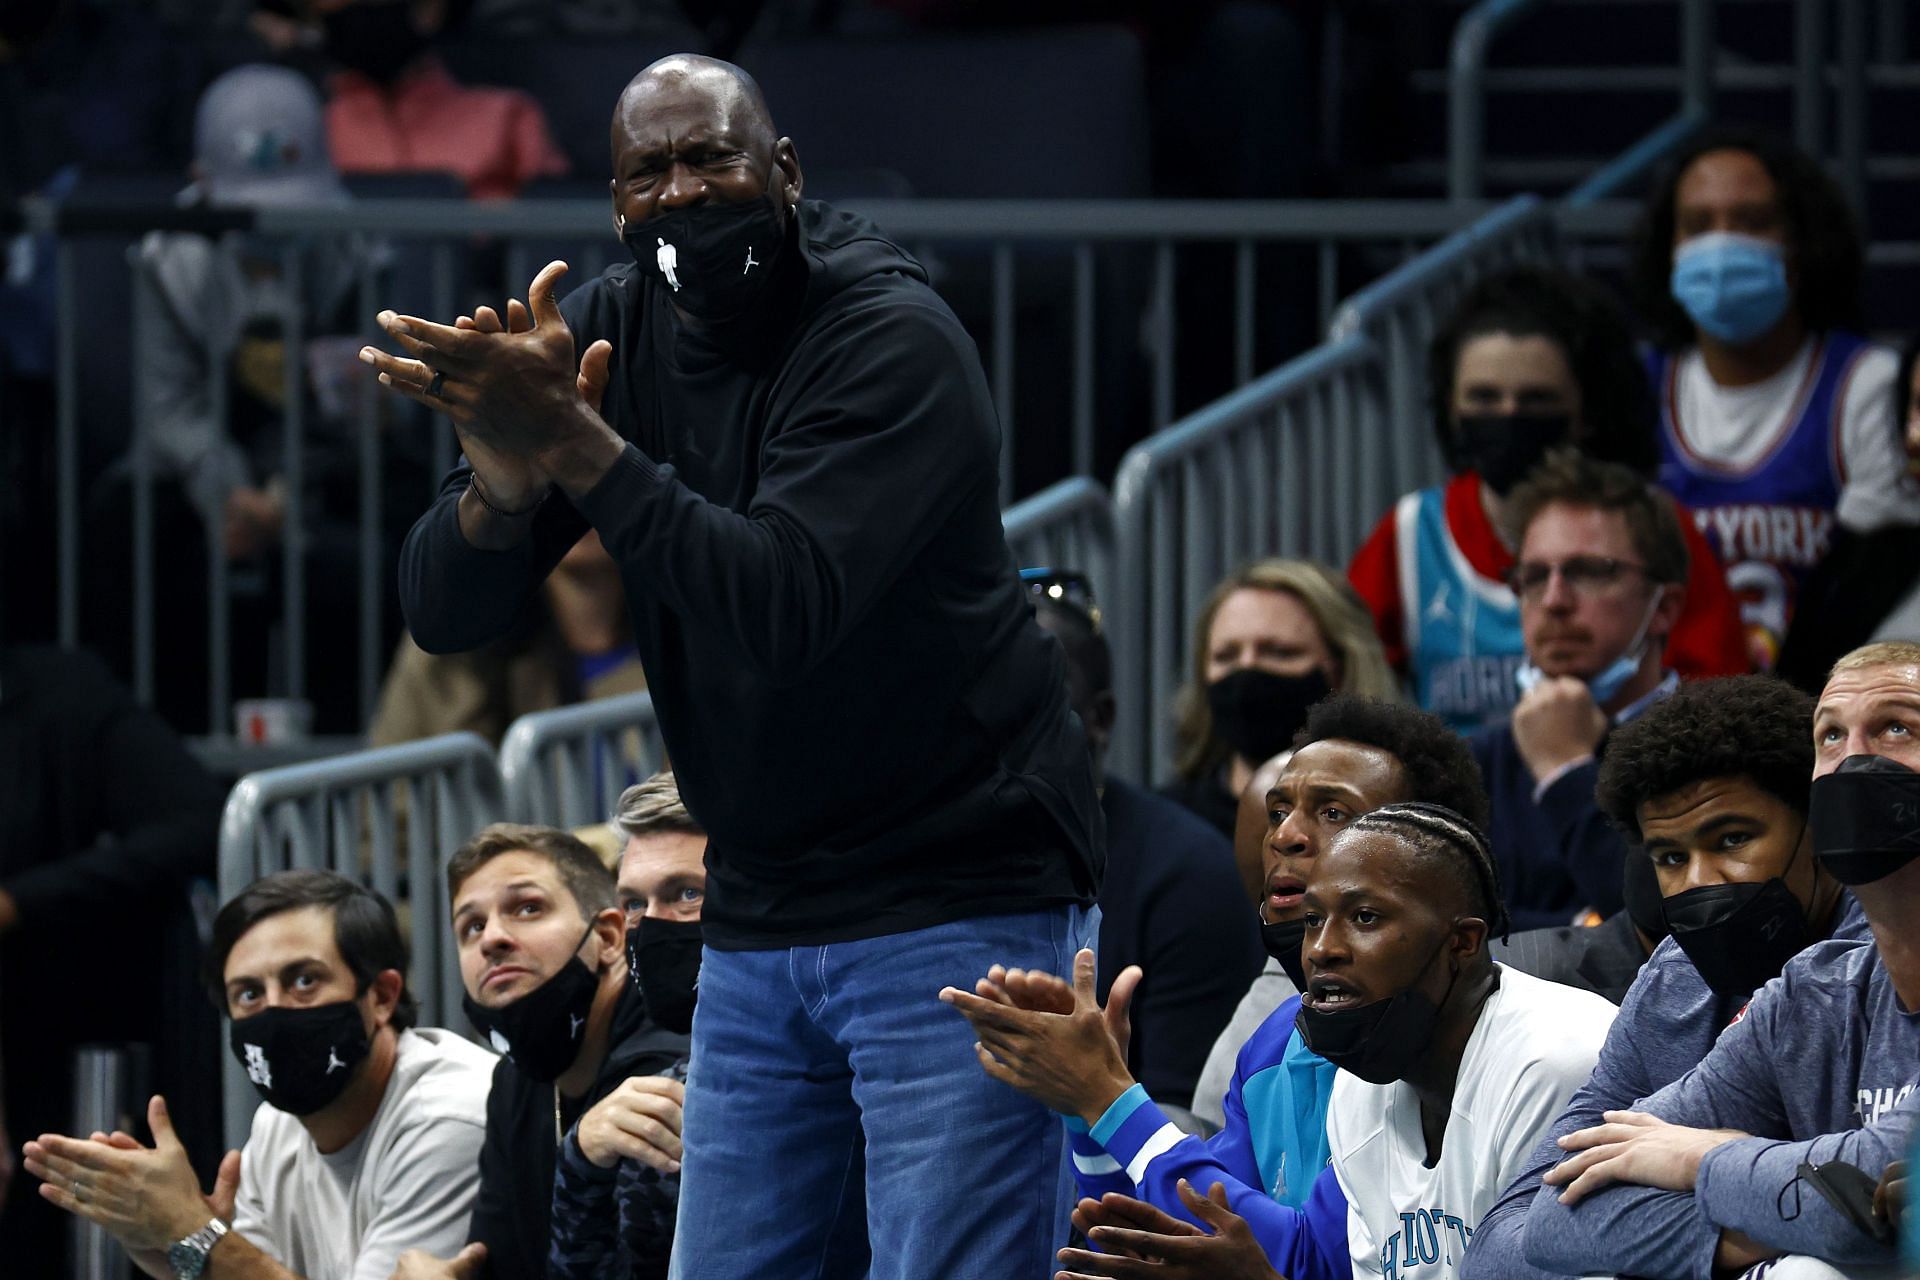 Charlotte Hornets owner and Hall of Famer Michael Jordan reacts during their game against the New York Knicks on Nov. 12 in Charlotte, North Carolina.